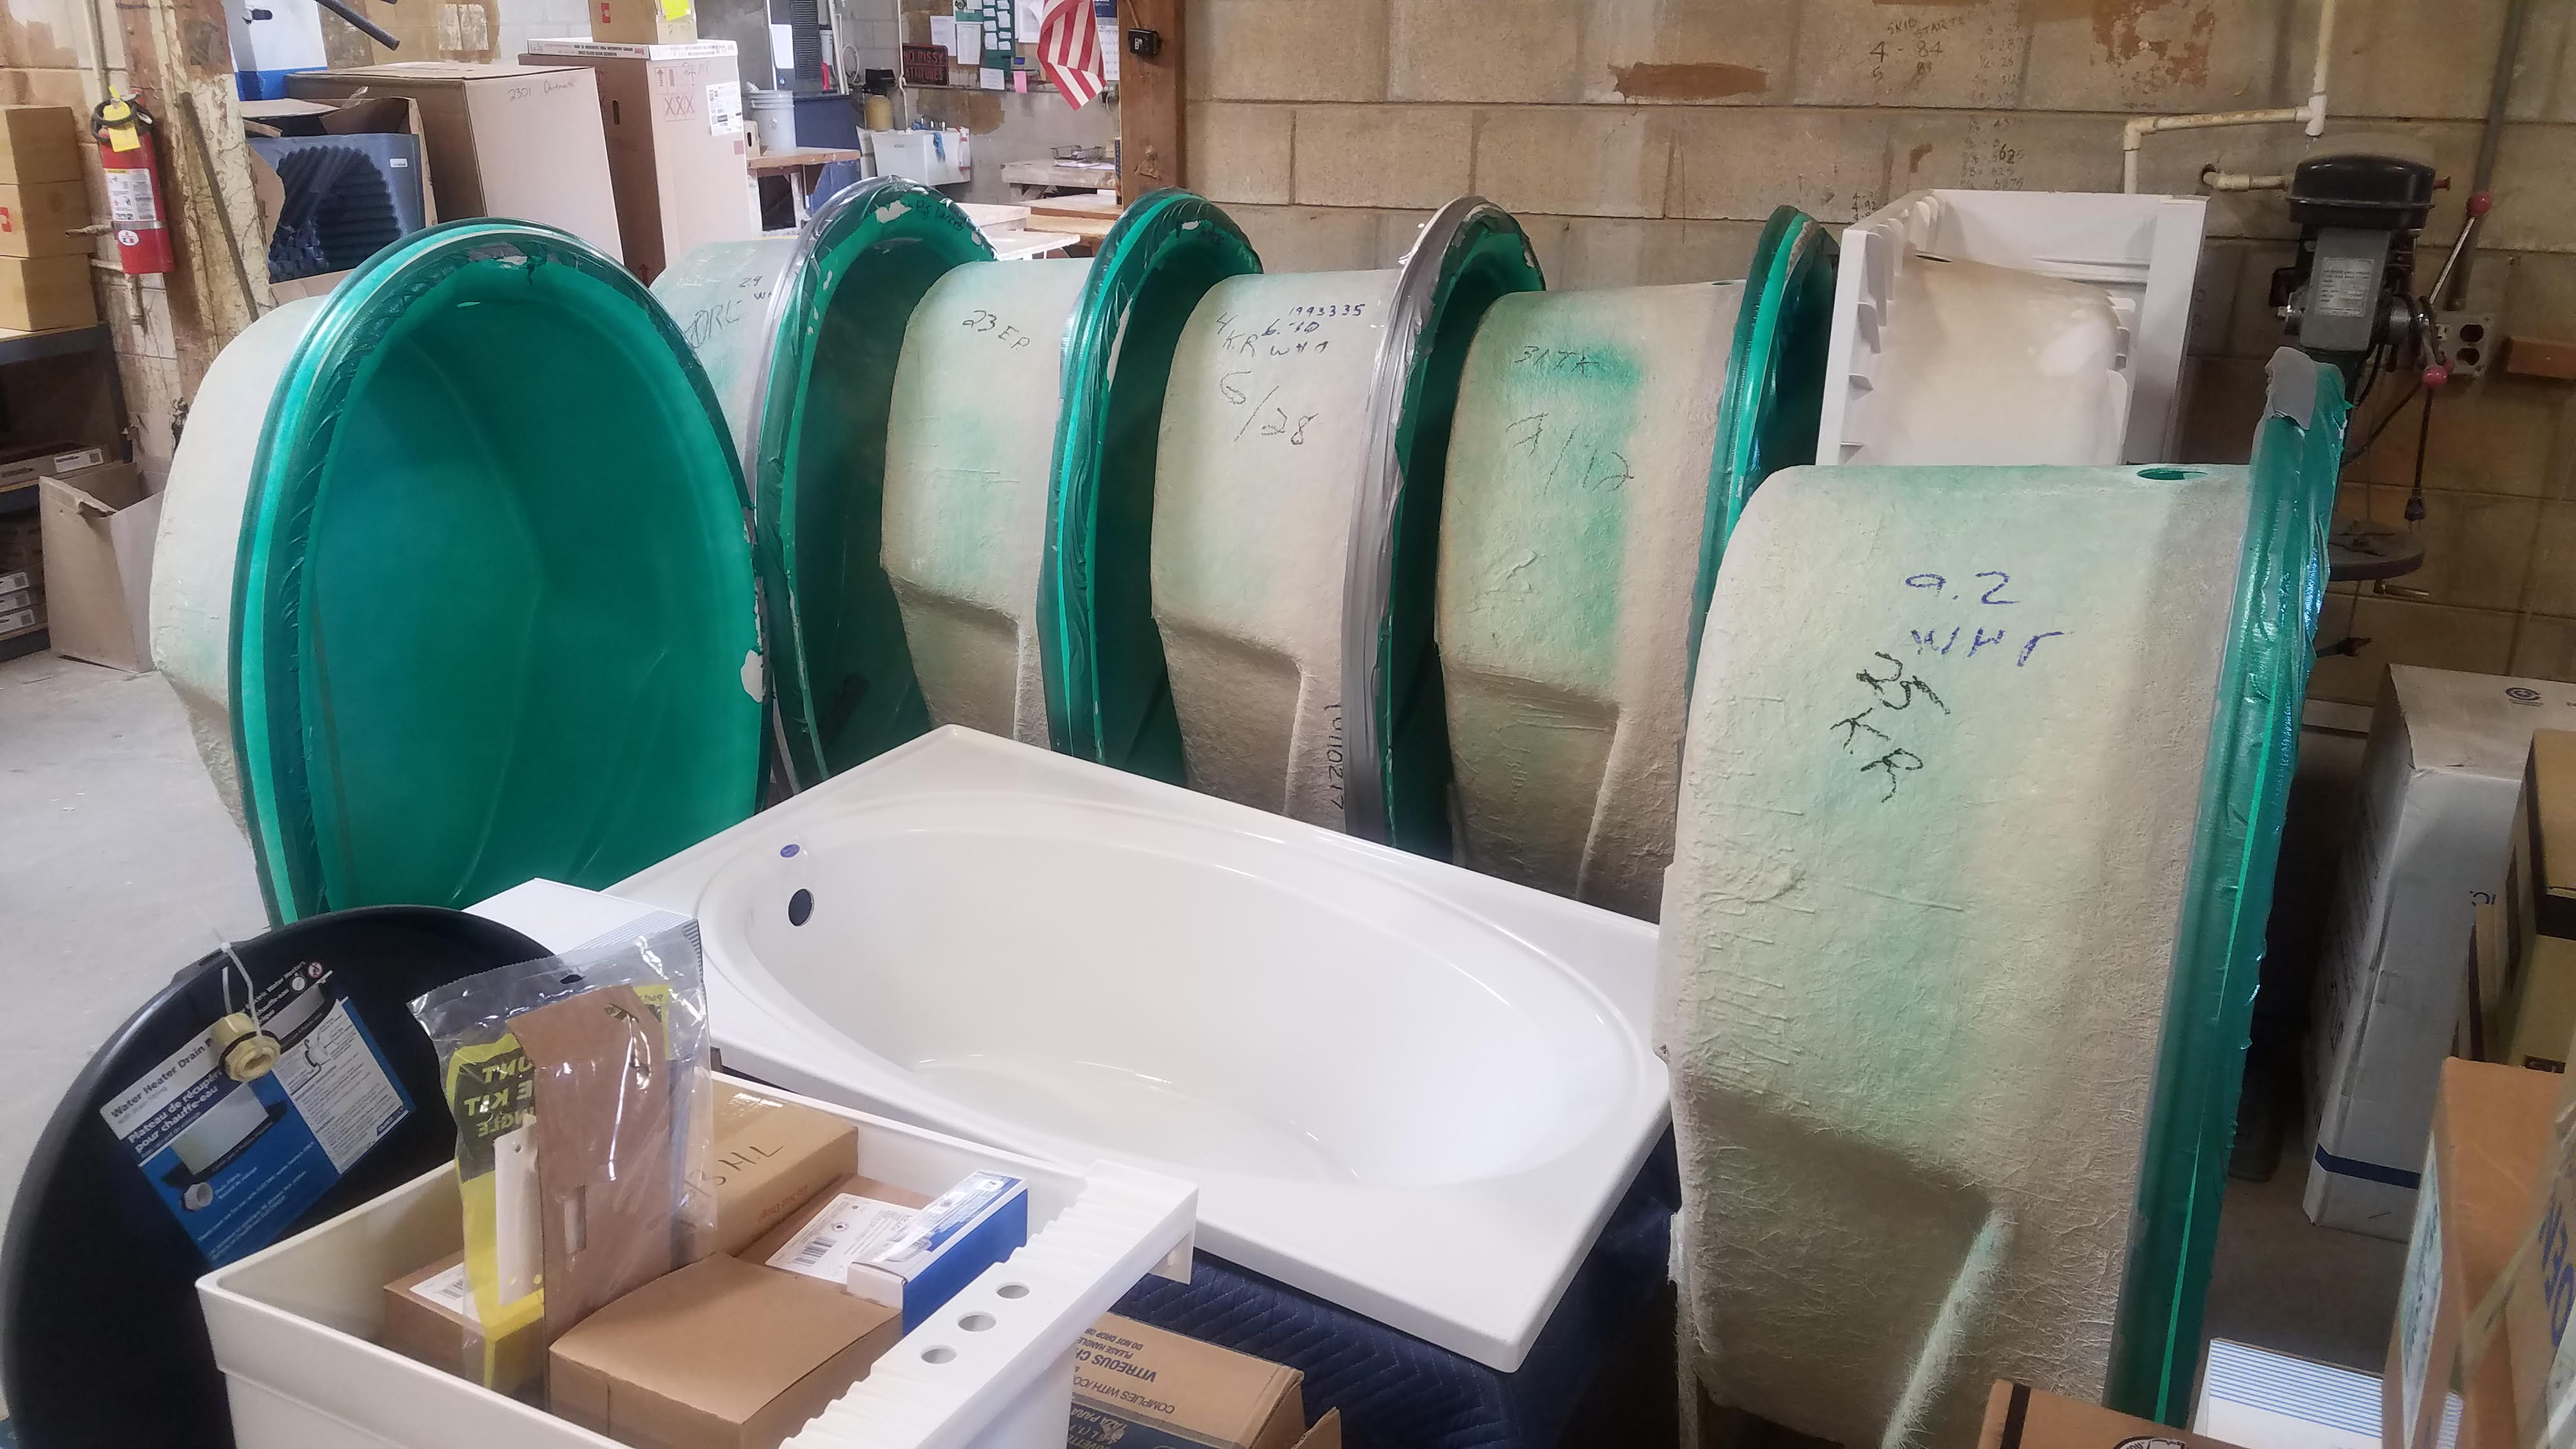 A-1 Southern Plumbing Bathtubs in-stock